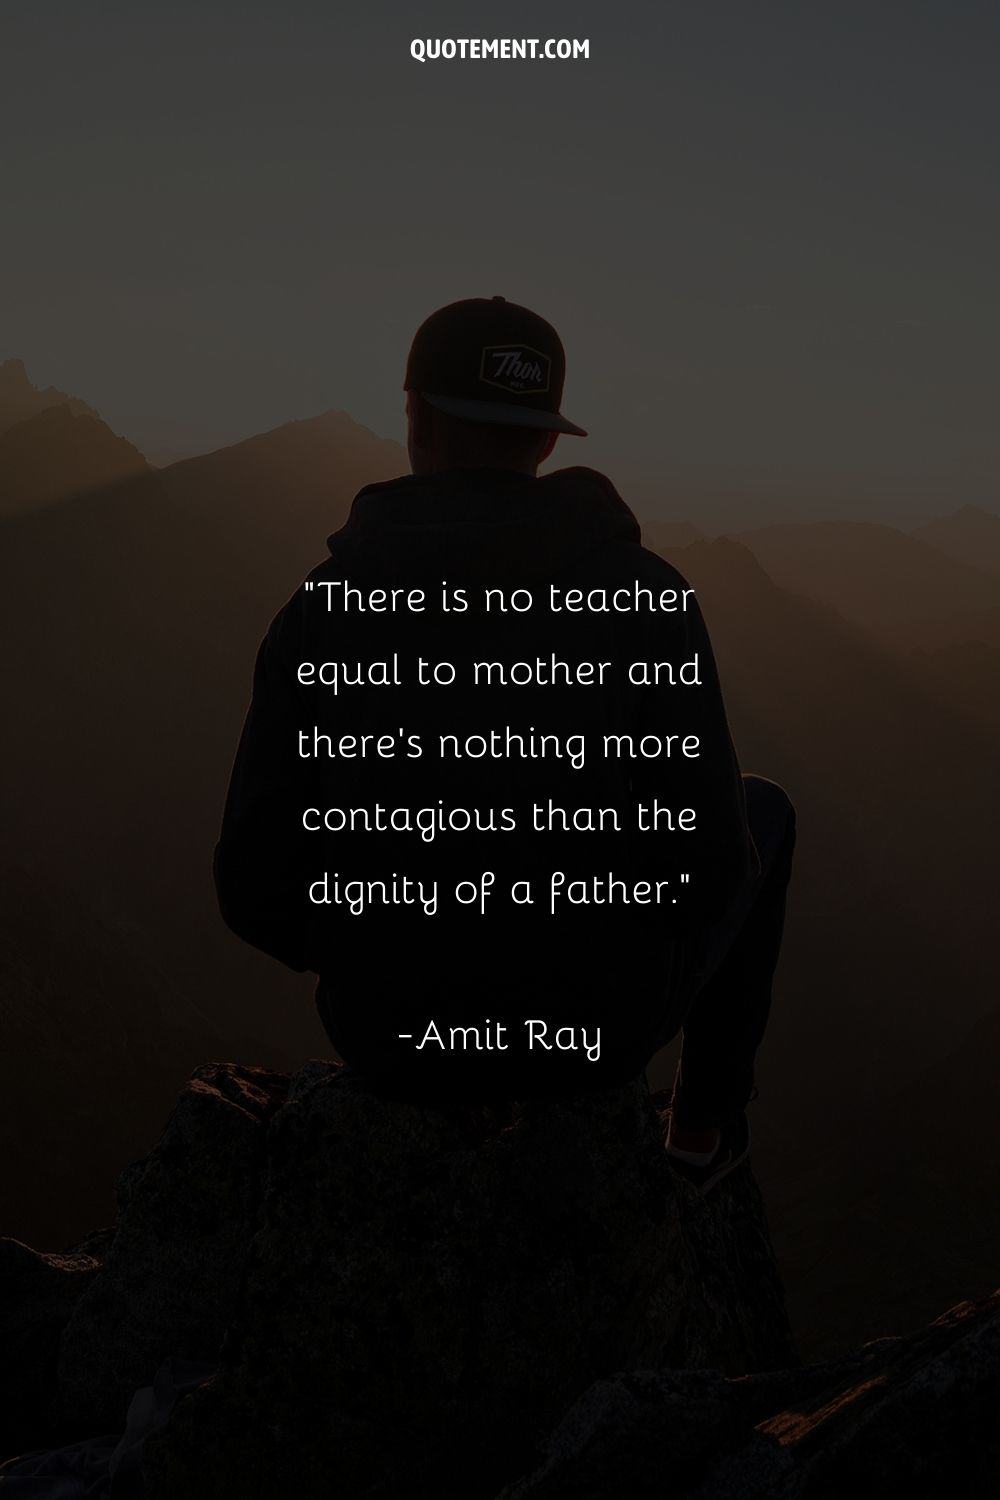 There is no teacher equal to mother and there's nothing more contagious than the dignity of a father